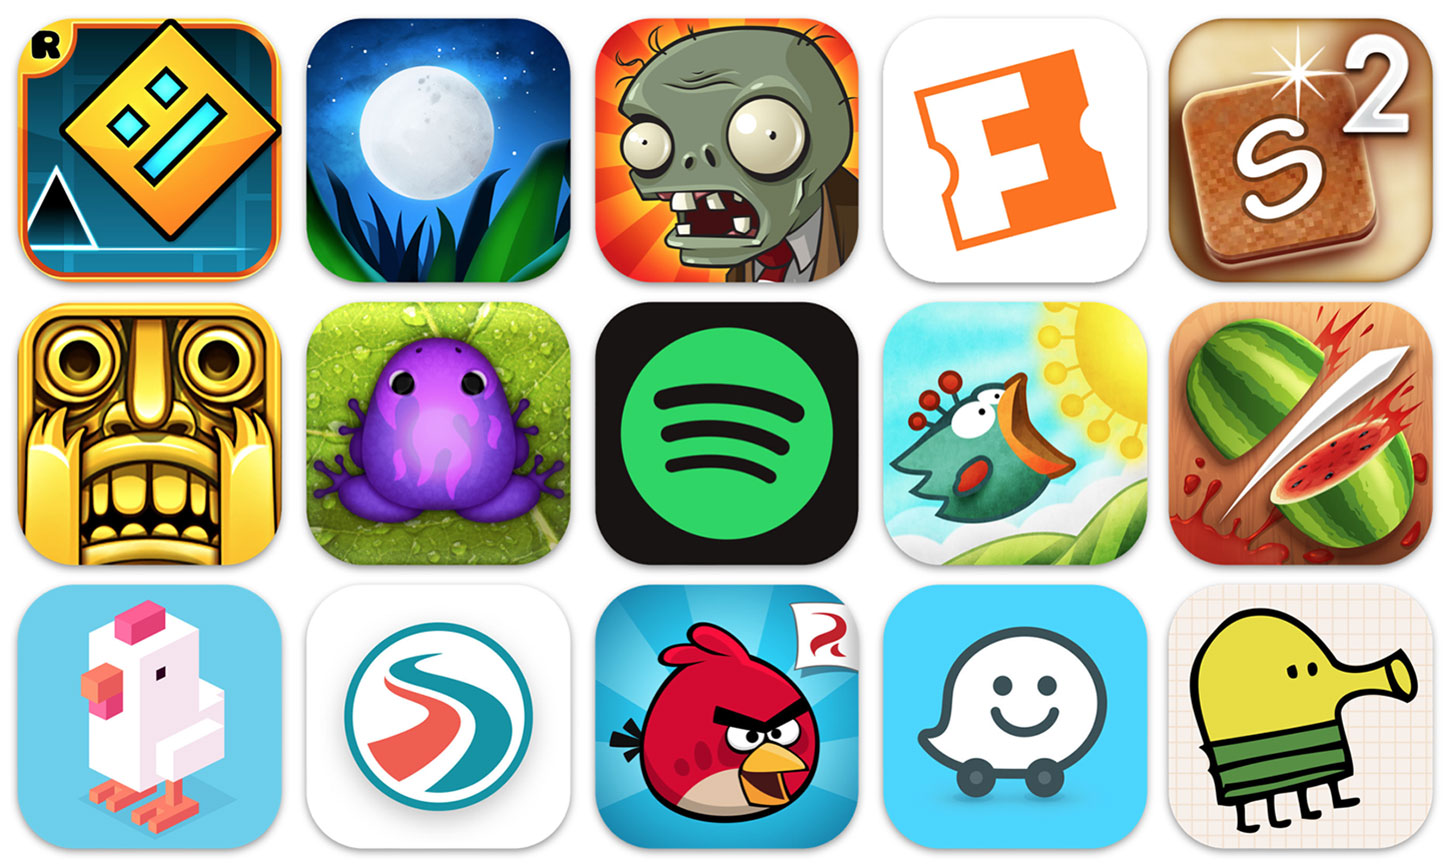 Icons of selected apps that have been most positively reviewed on the U.S. App Store